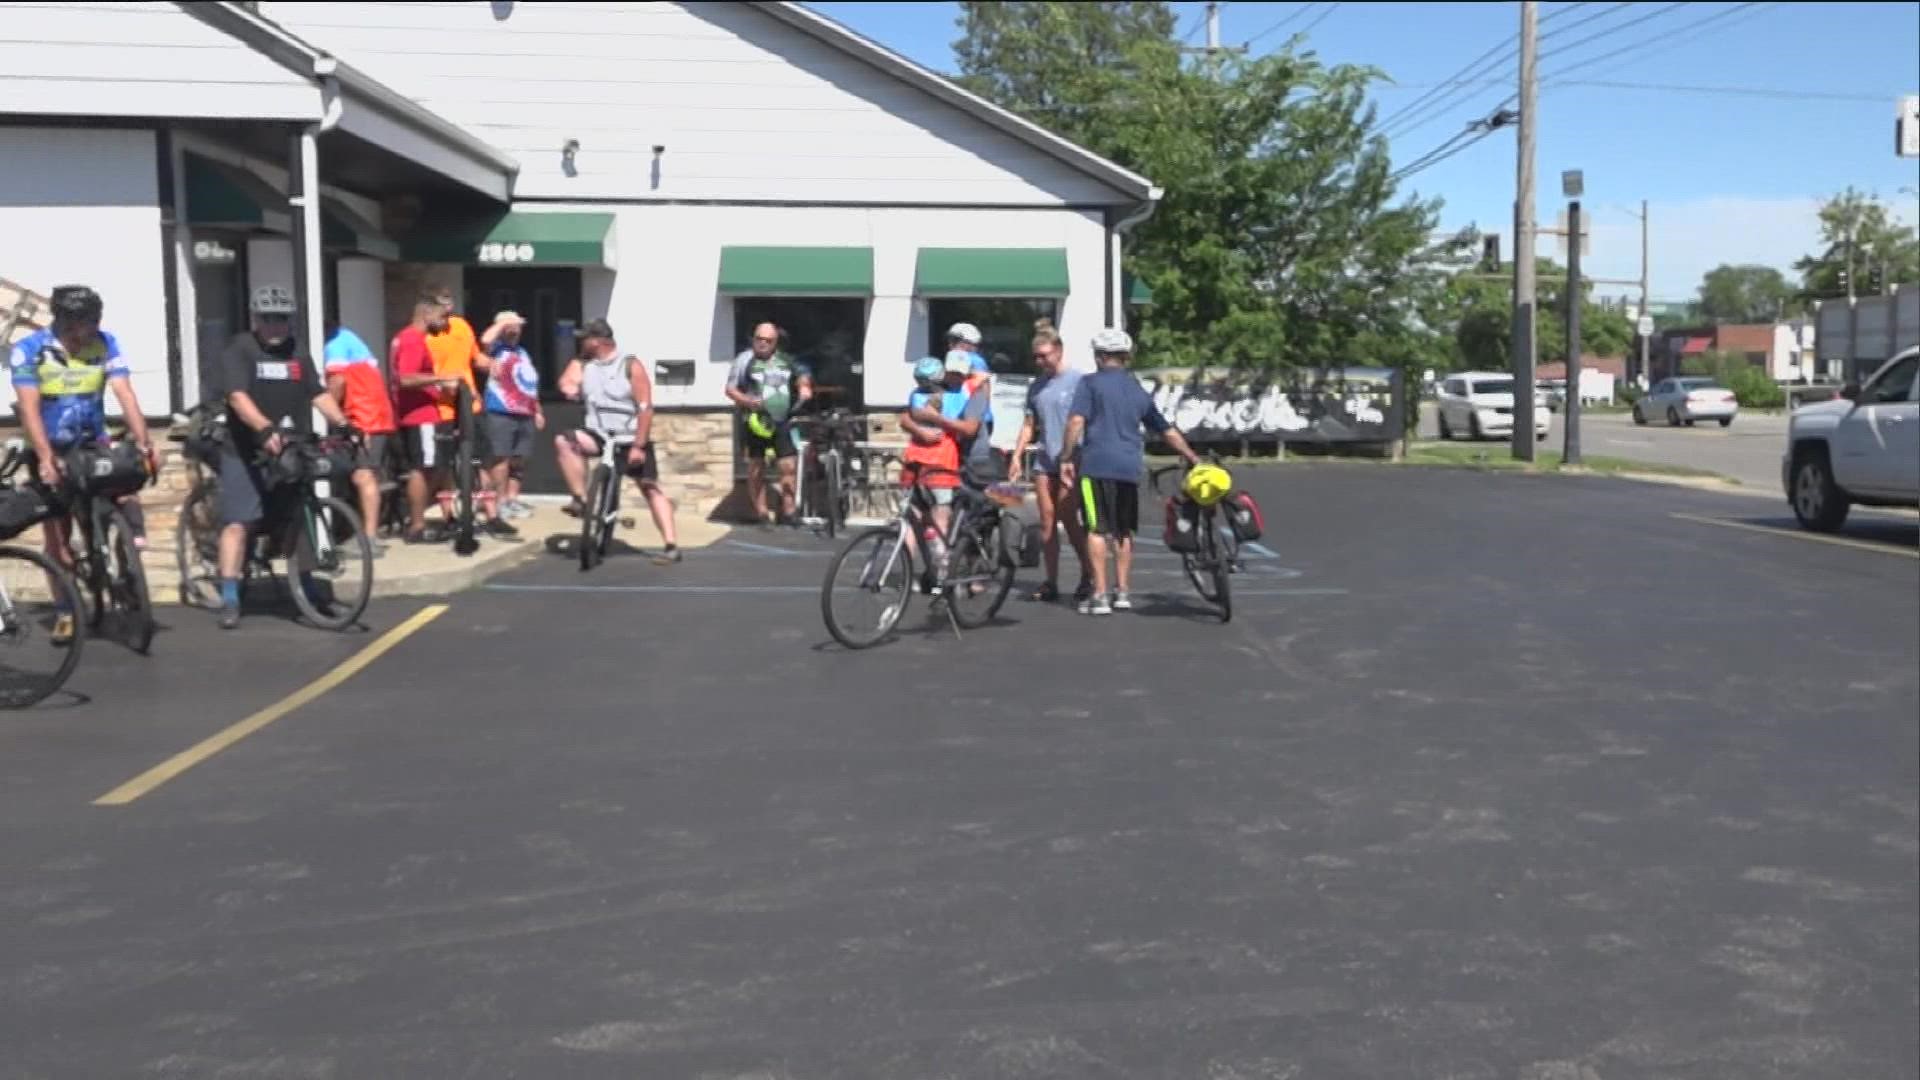 The Miles 2 Freedom bike-packing ride goes from Toledo to a Swanton ranch and raises money for local veterans while providing another hobby.